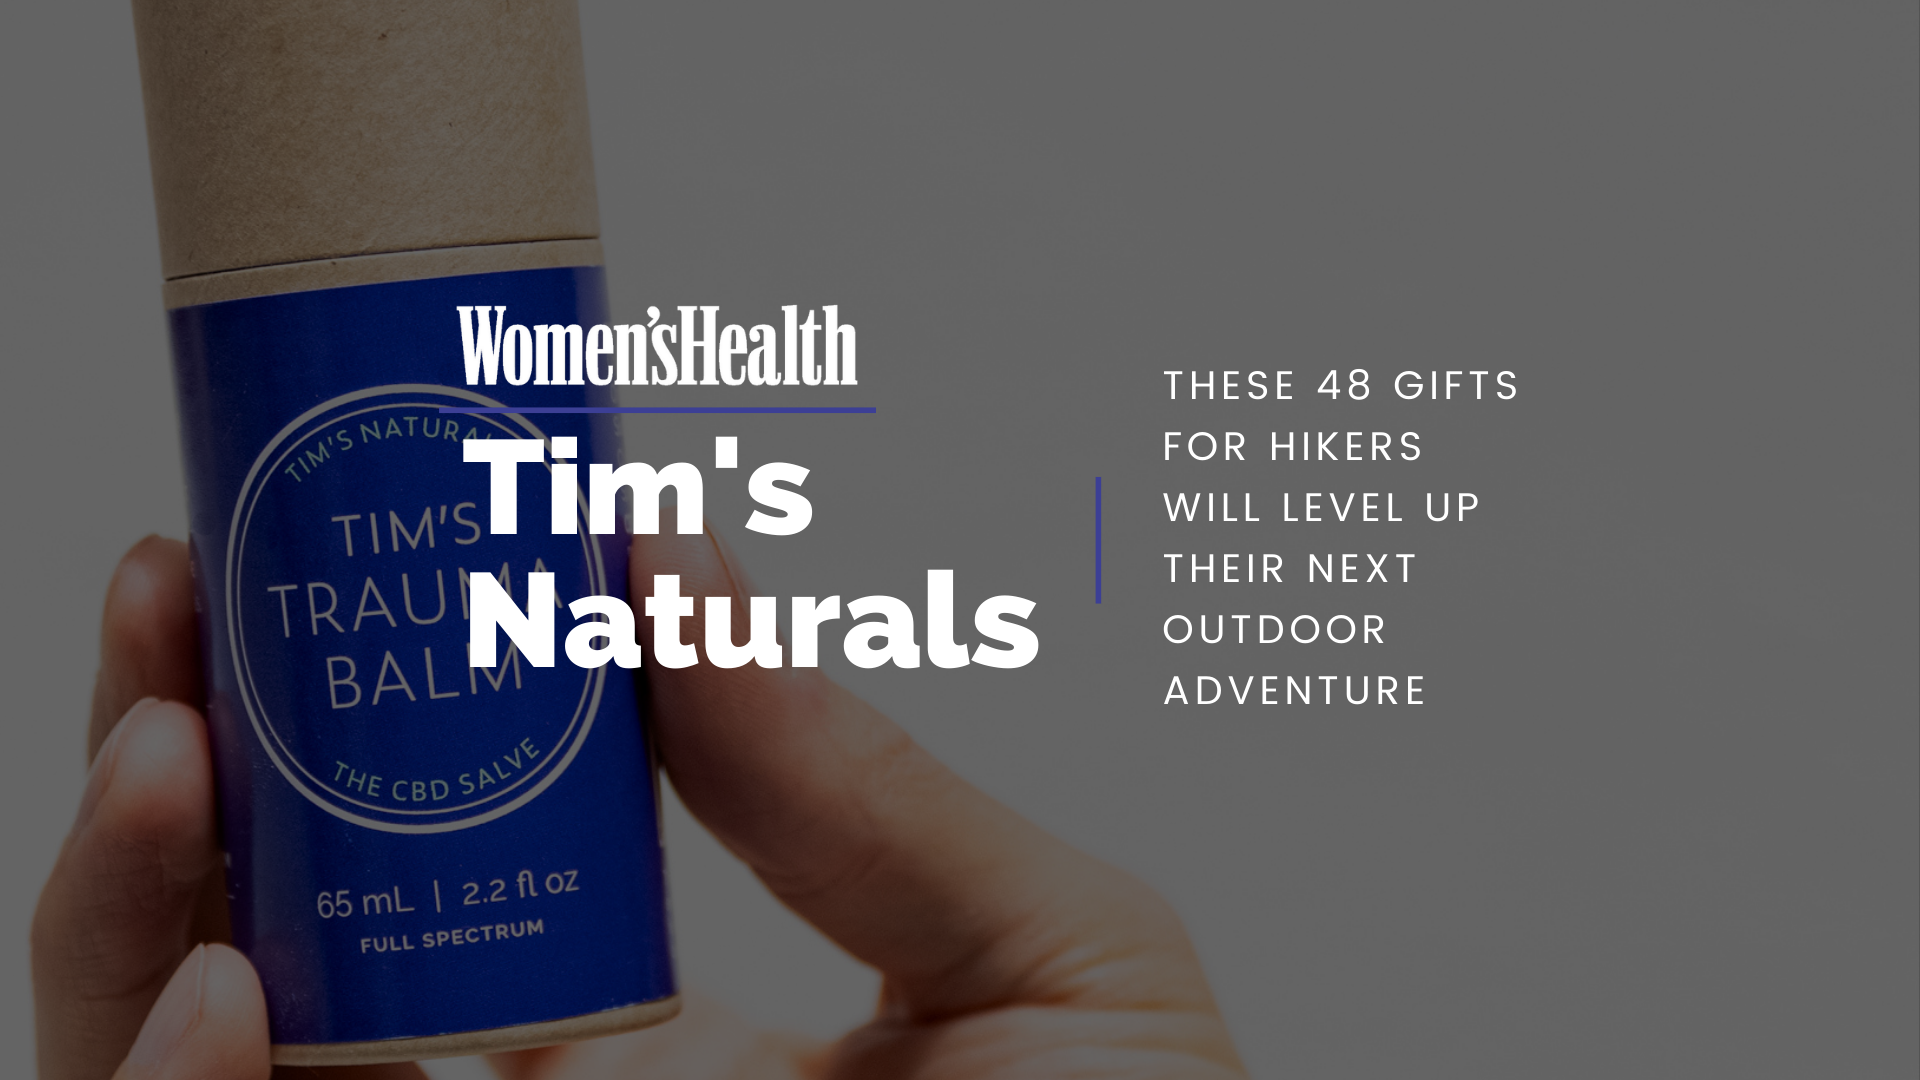 Women's Health Magazine: These 48 Gifts For Hikers Will Level Up Their Next Outdoor Adventure